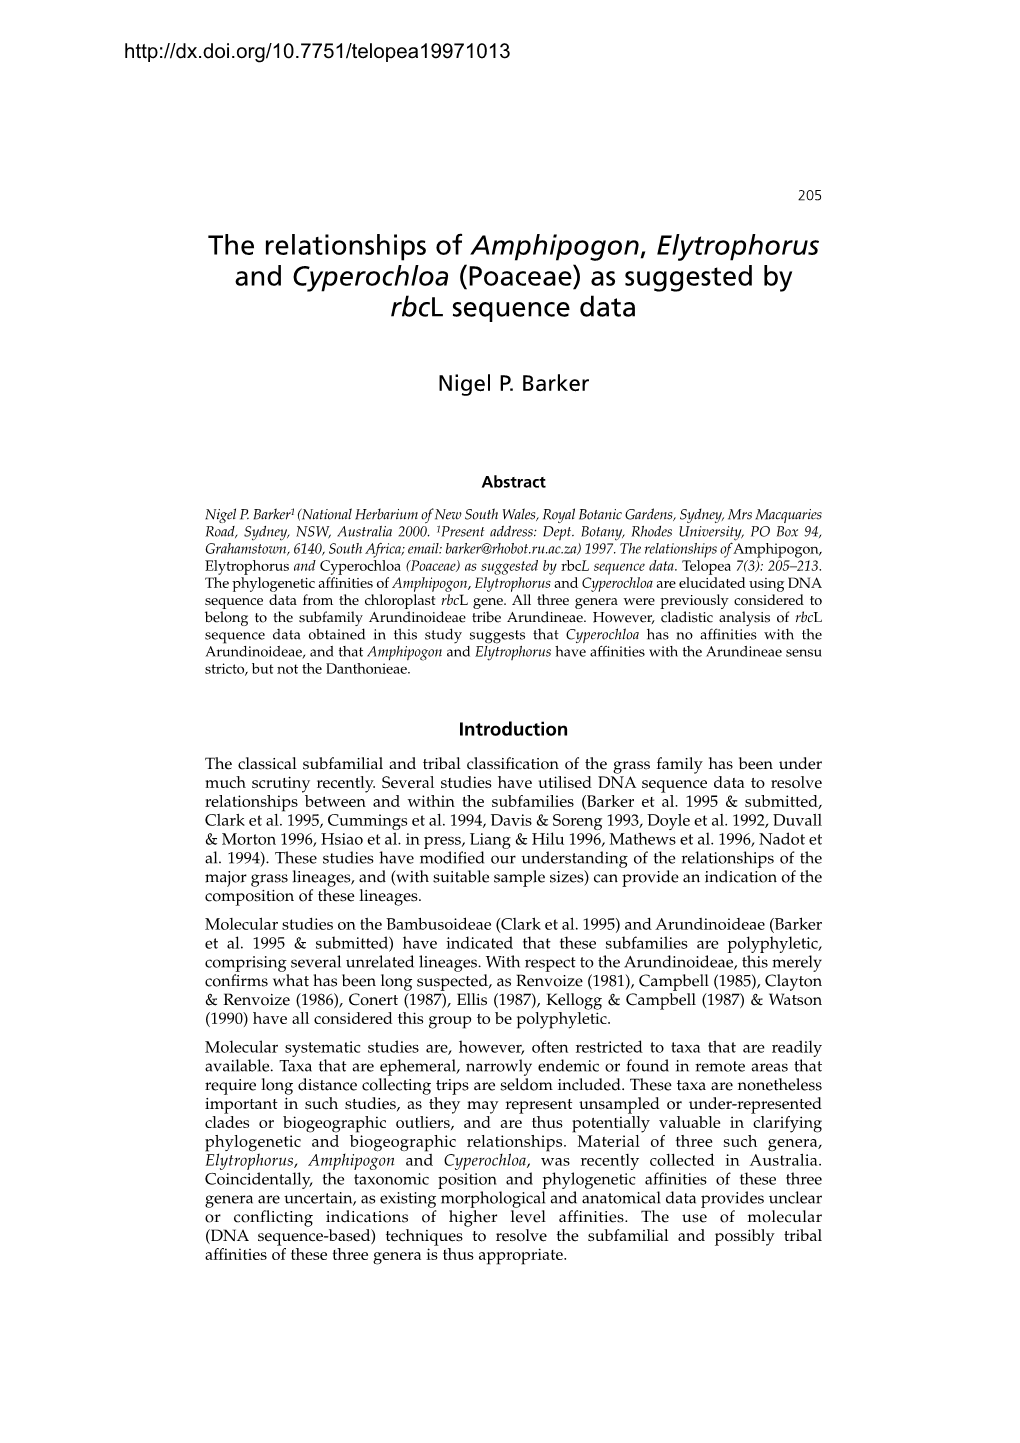 The Relationships of Amphipogon, Elytrophorus and Cyperochloa (Poaceae) As Suggested by Rbcl Sequence Data